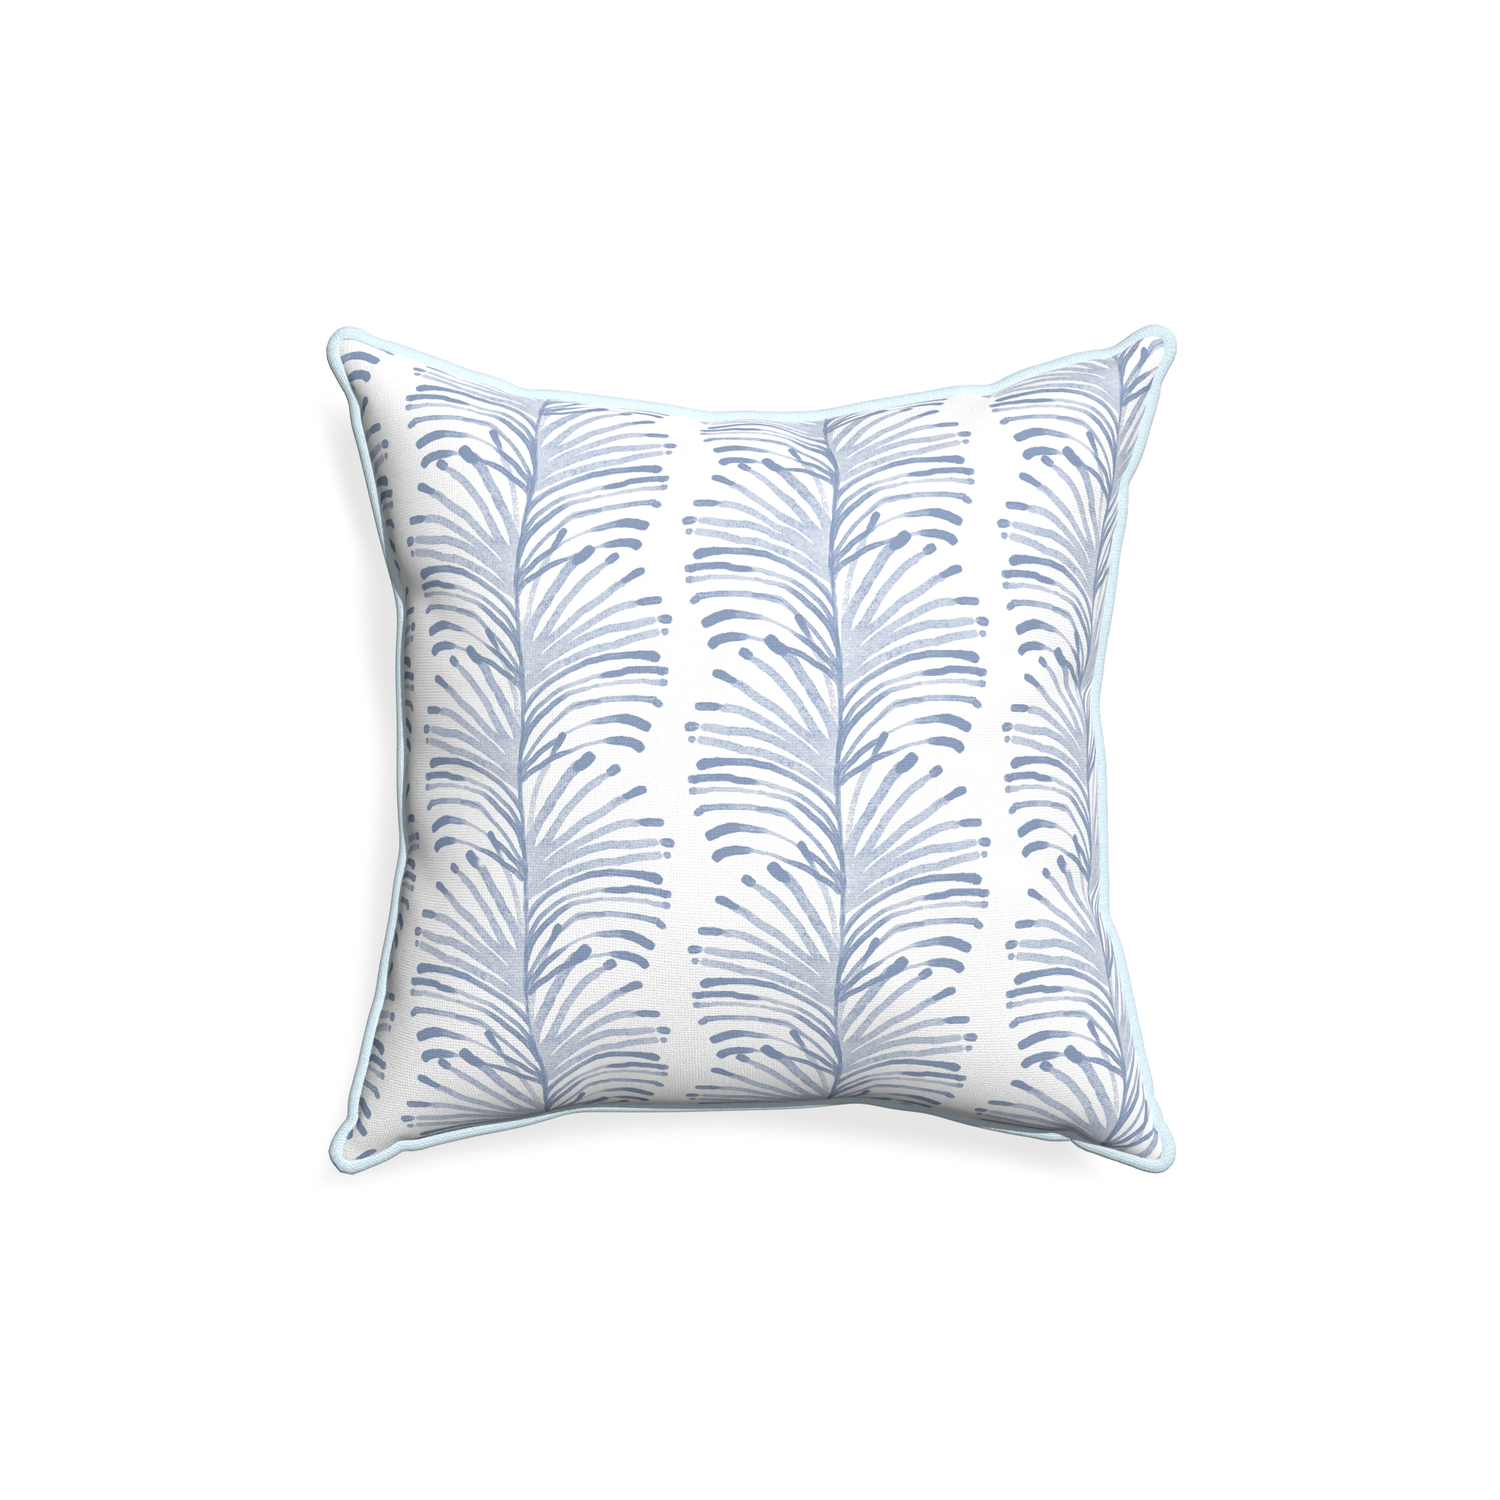 18-square emma sky custom pillow with powder piping on white background